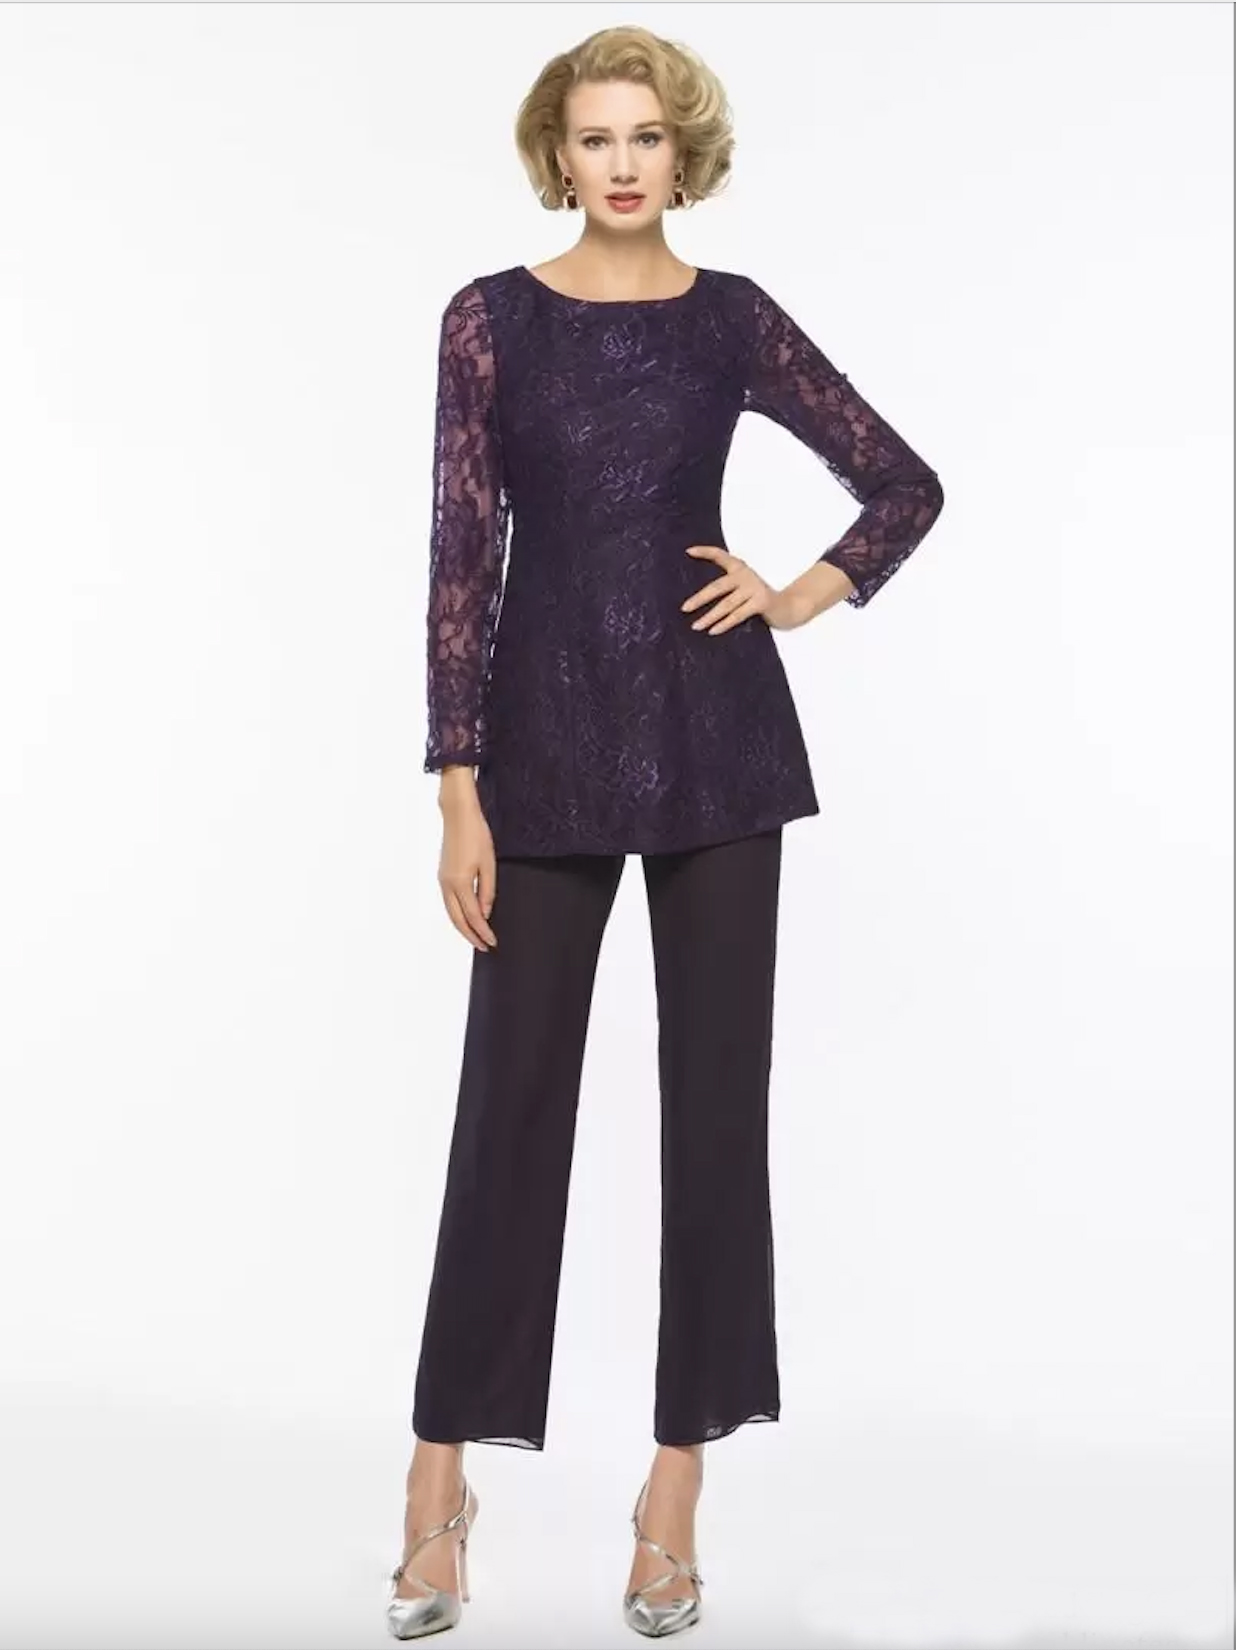 Dark Purple Lace Mother Of The Bride Pant Suits Long Sleeves Bateau Neck Wedding Guest Dress Chiffon Plus Size Mothers Groom Dresses